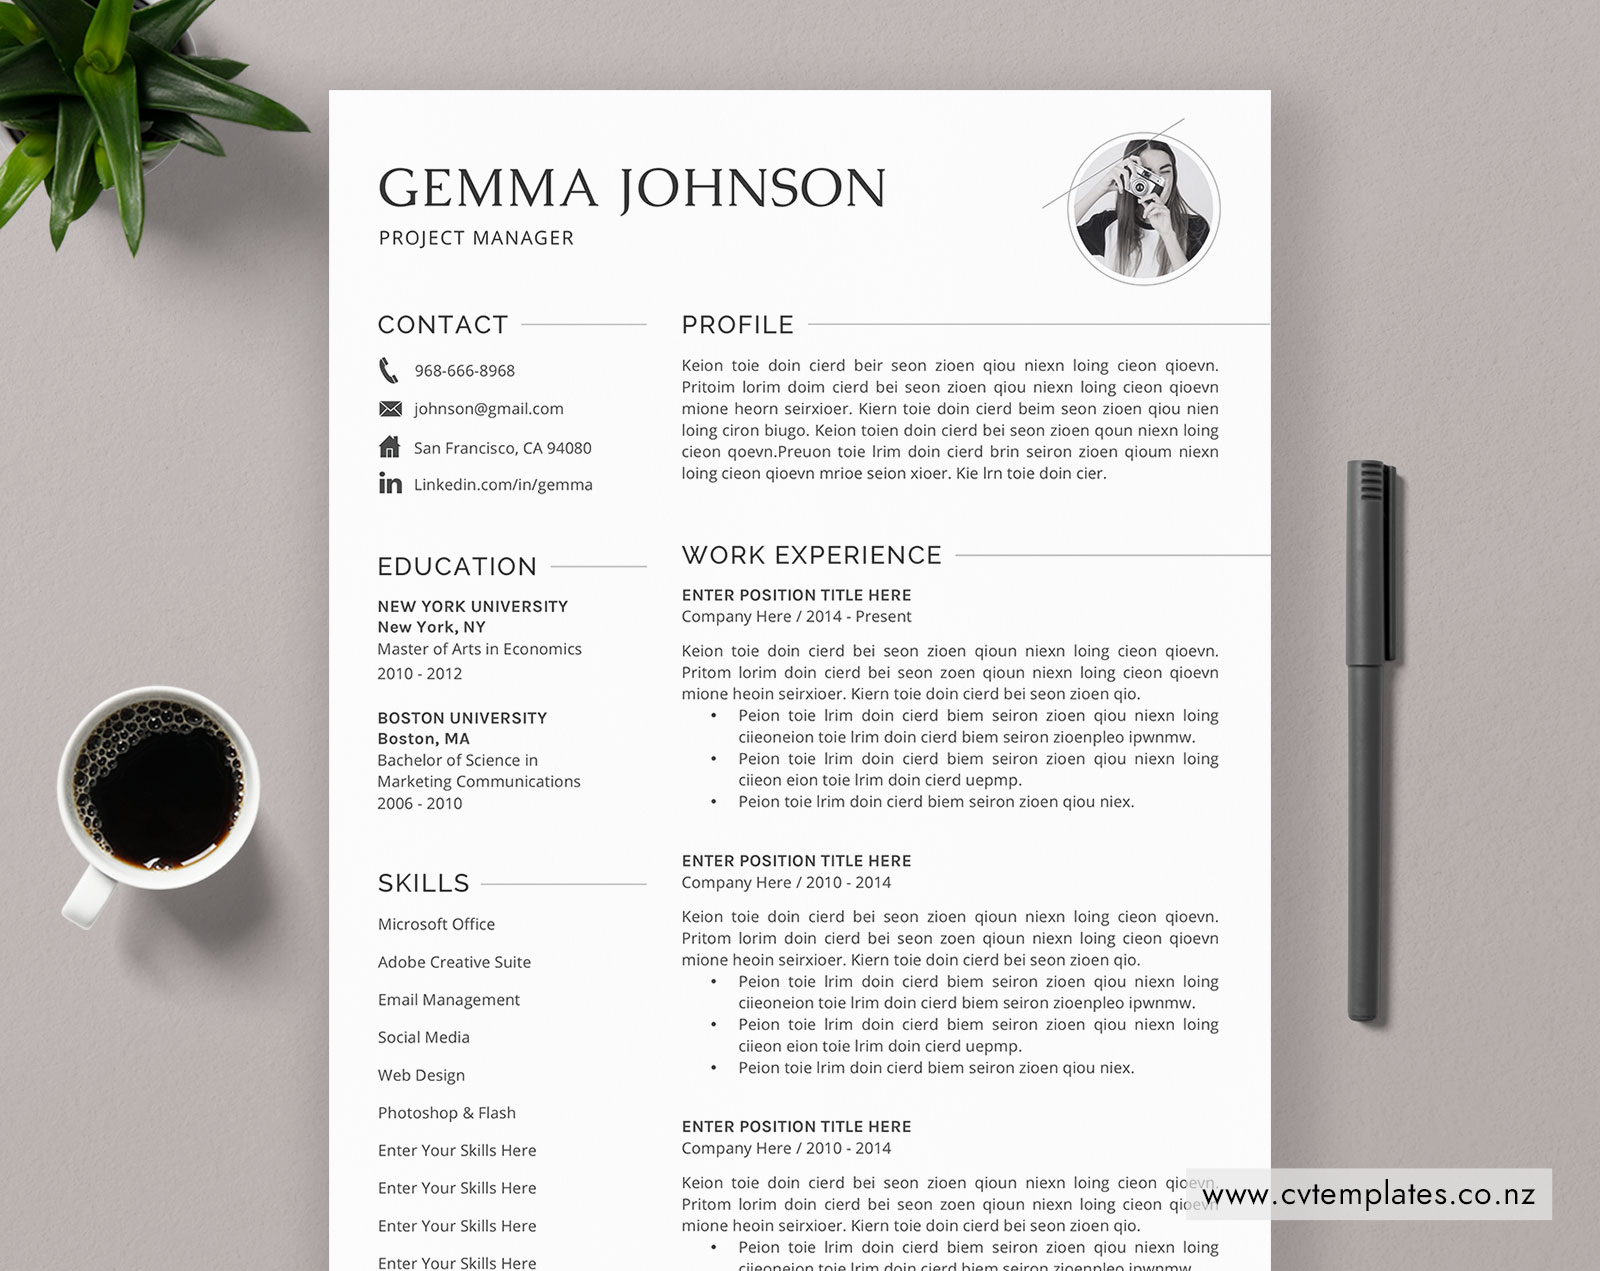 Template For Cv from www.cvtemplates.co.nz